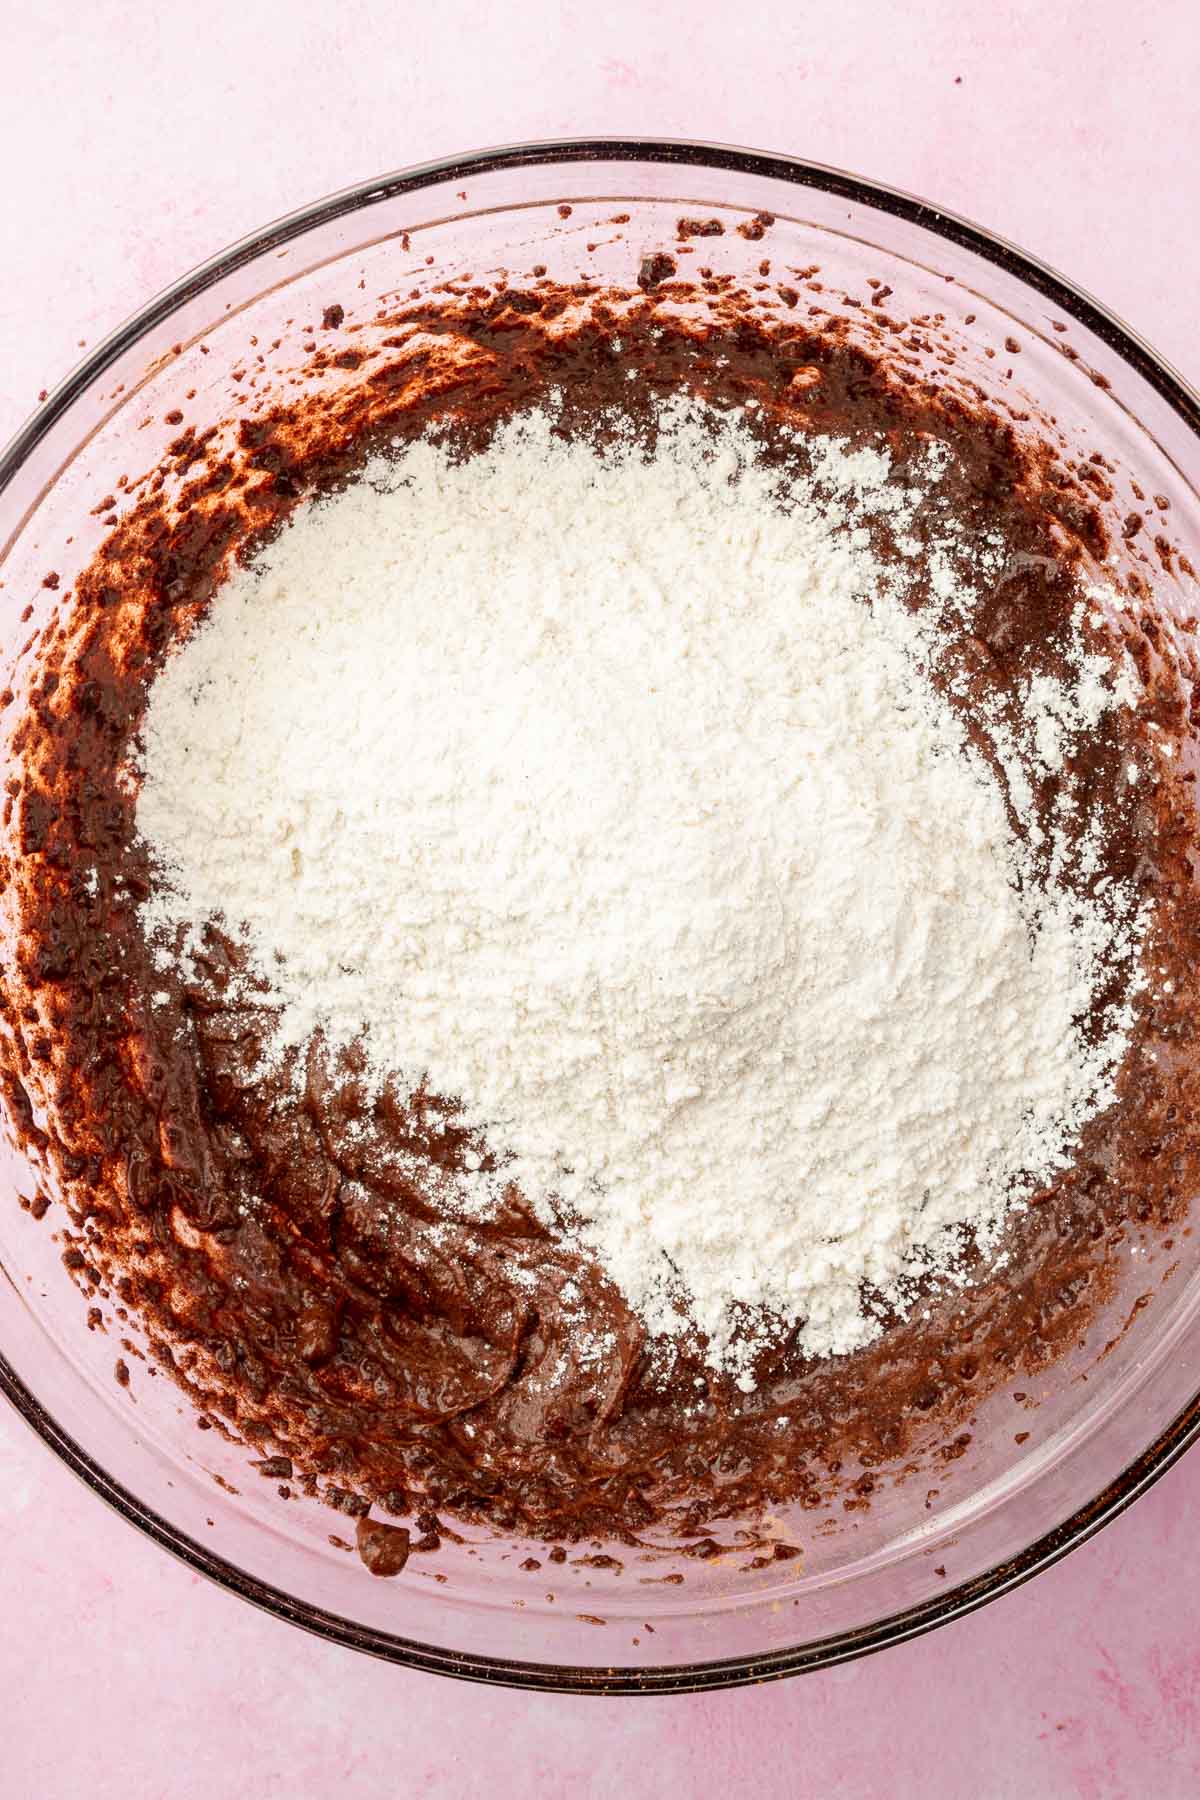 A glass mixing bowl with chocolate batter topped with all-purpose flour before mixing together.